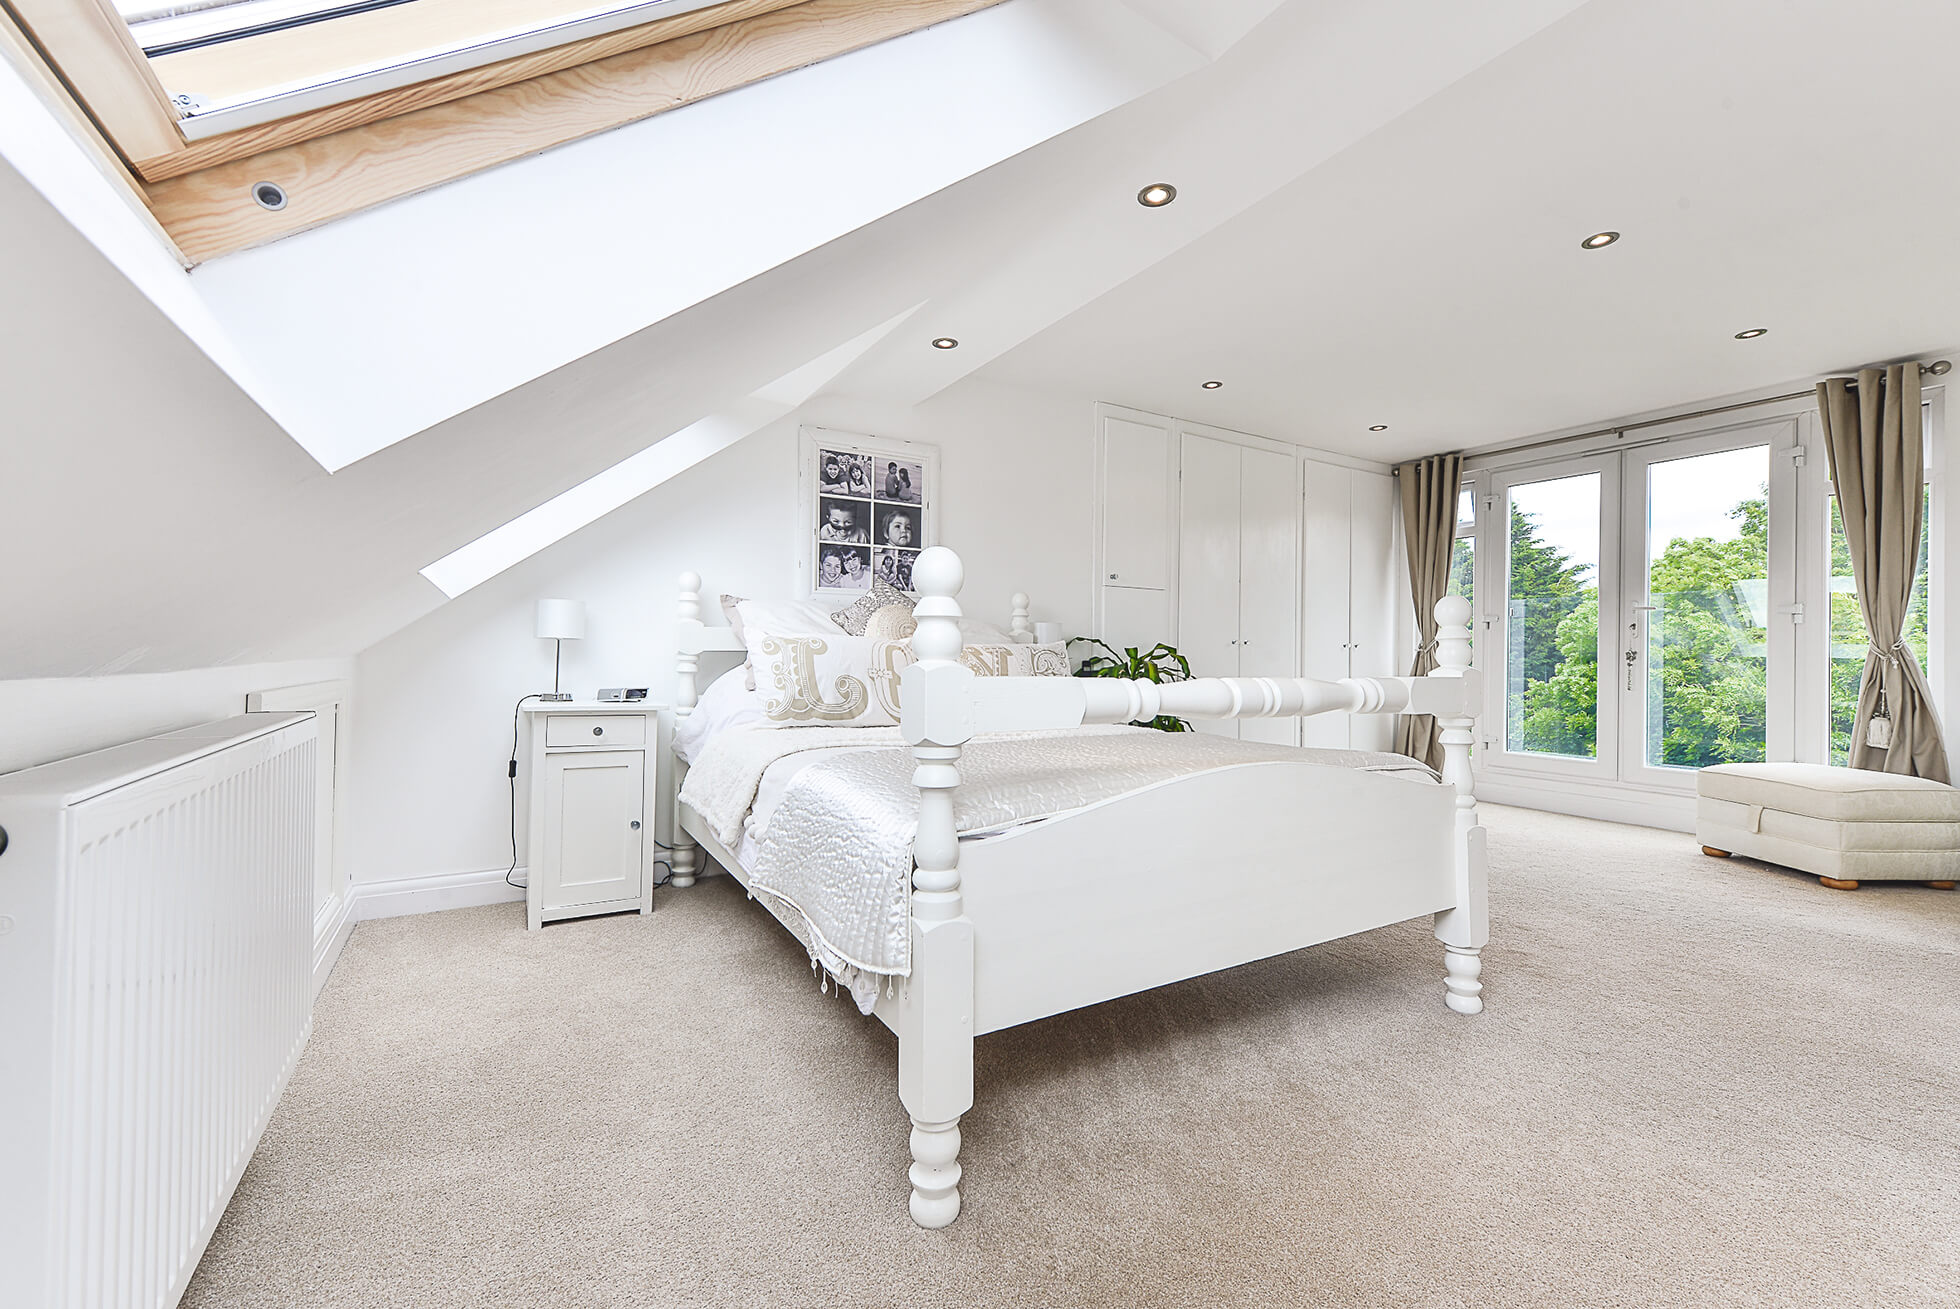 Do you have a question about converting your Loft in Astrope? Here are the most popular questions asked by our clients.